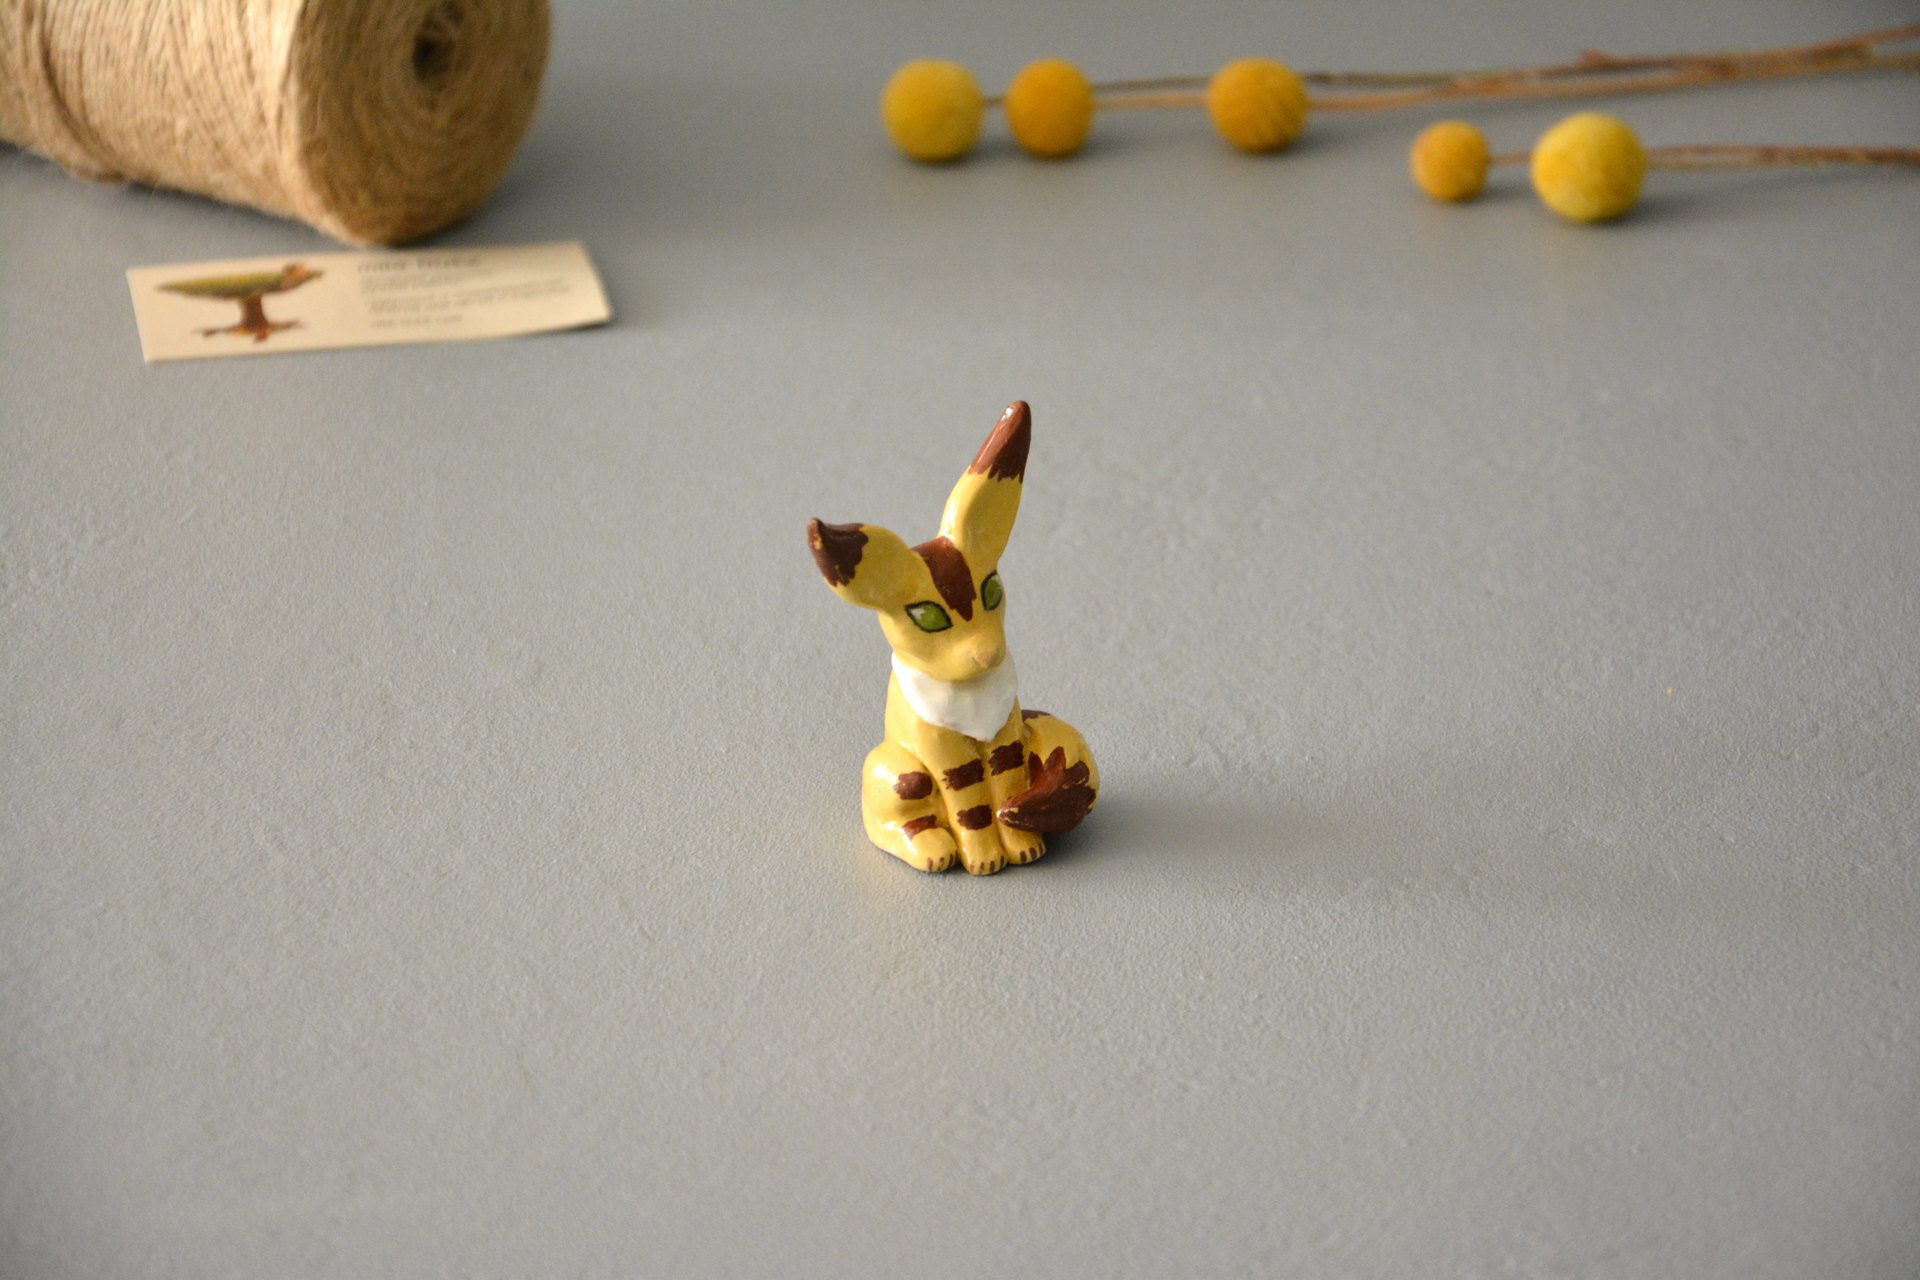 Squirrel-fox figurine, a character from the anime "Navsikai from the valley of the winds, height 7cm, photo 2 of 6.